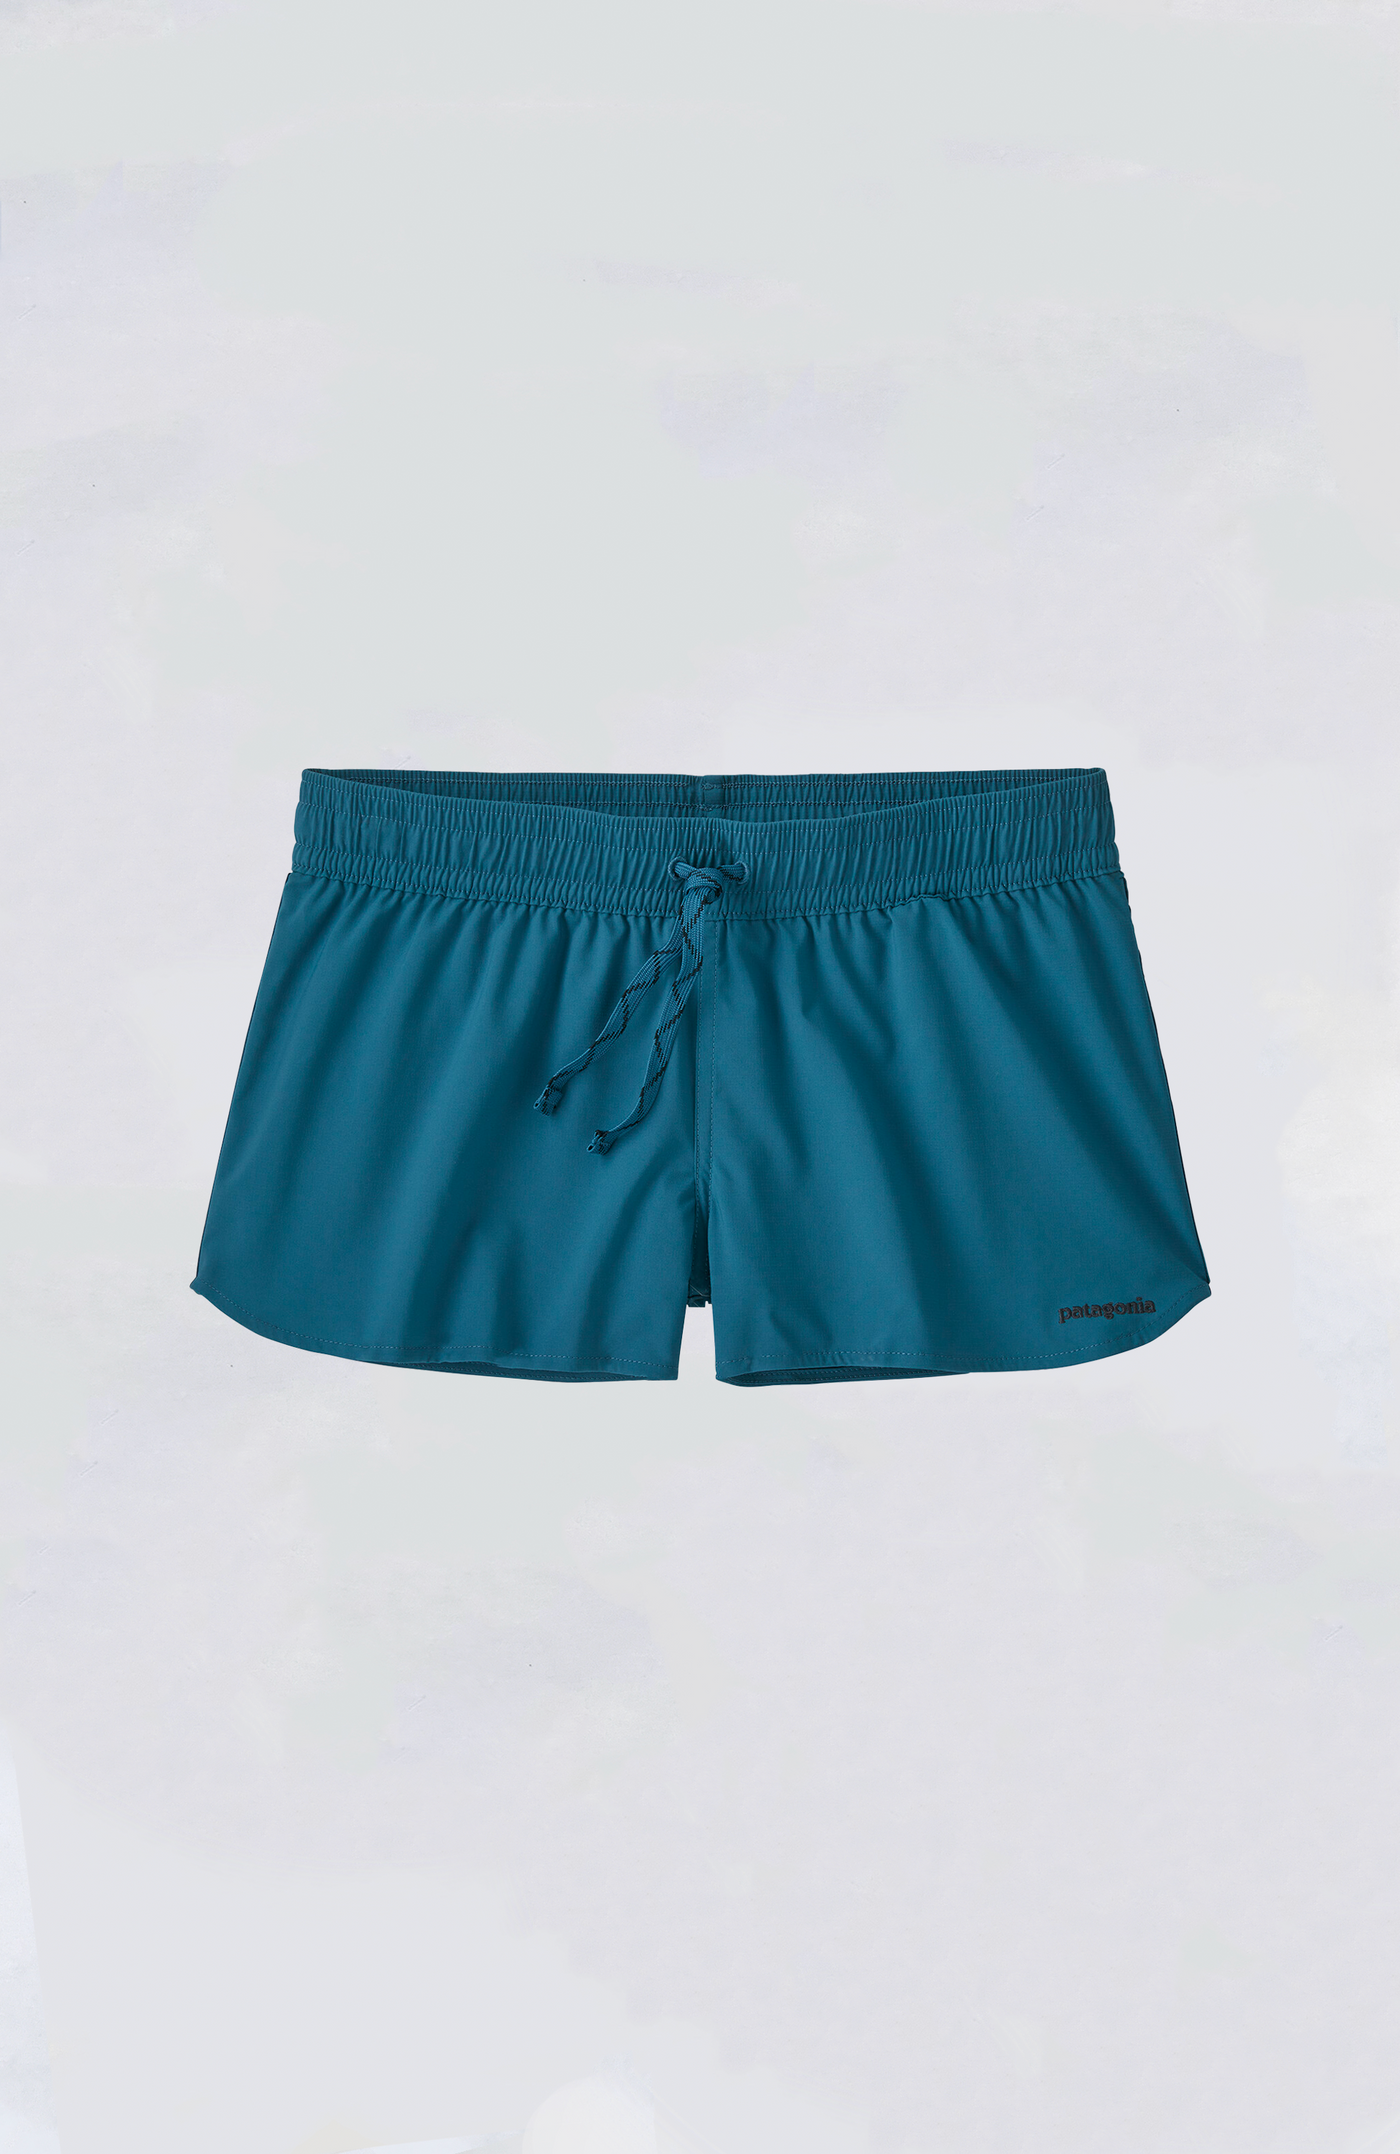 Patagonia Women's Shorts - W's Stretch Planing Micro Shorts - 2 in.